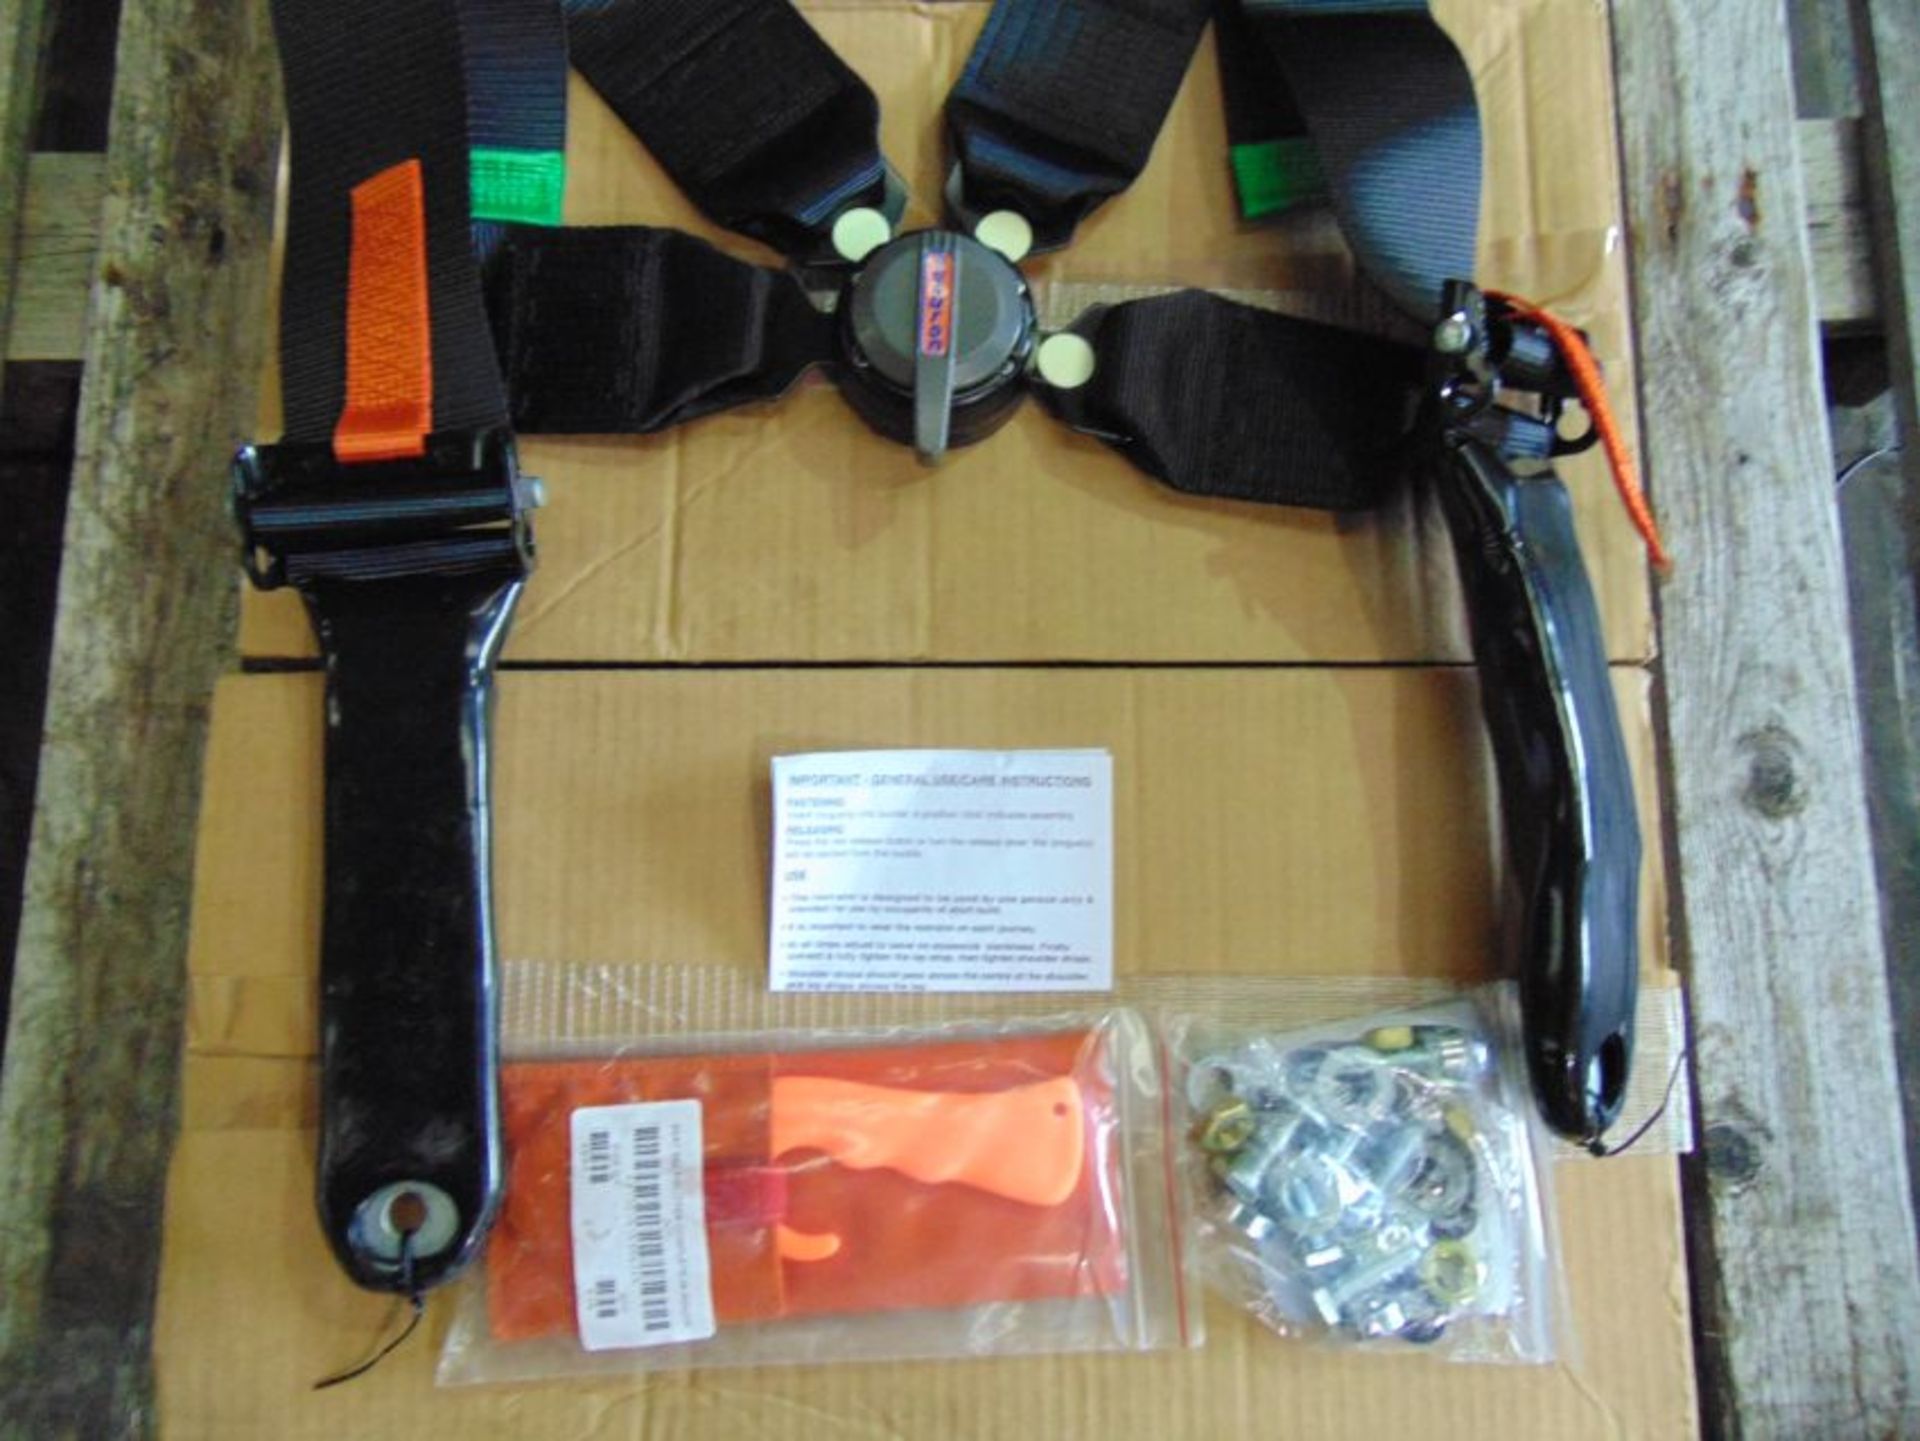 4 x Securon 720BL/V5 4 Point Troop Seat Restraint Harnesses - Image 2 of 5